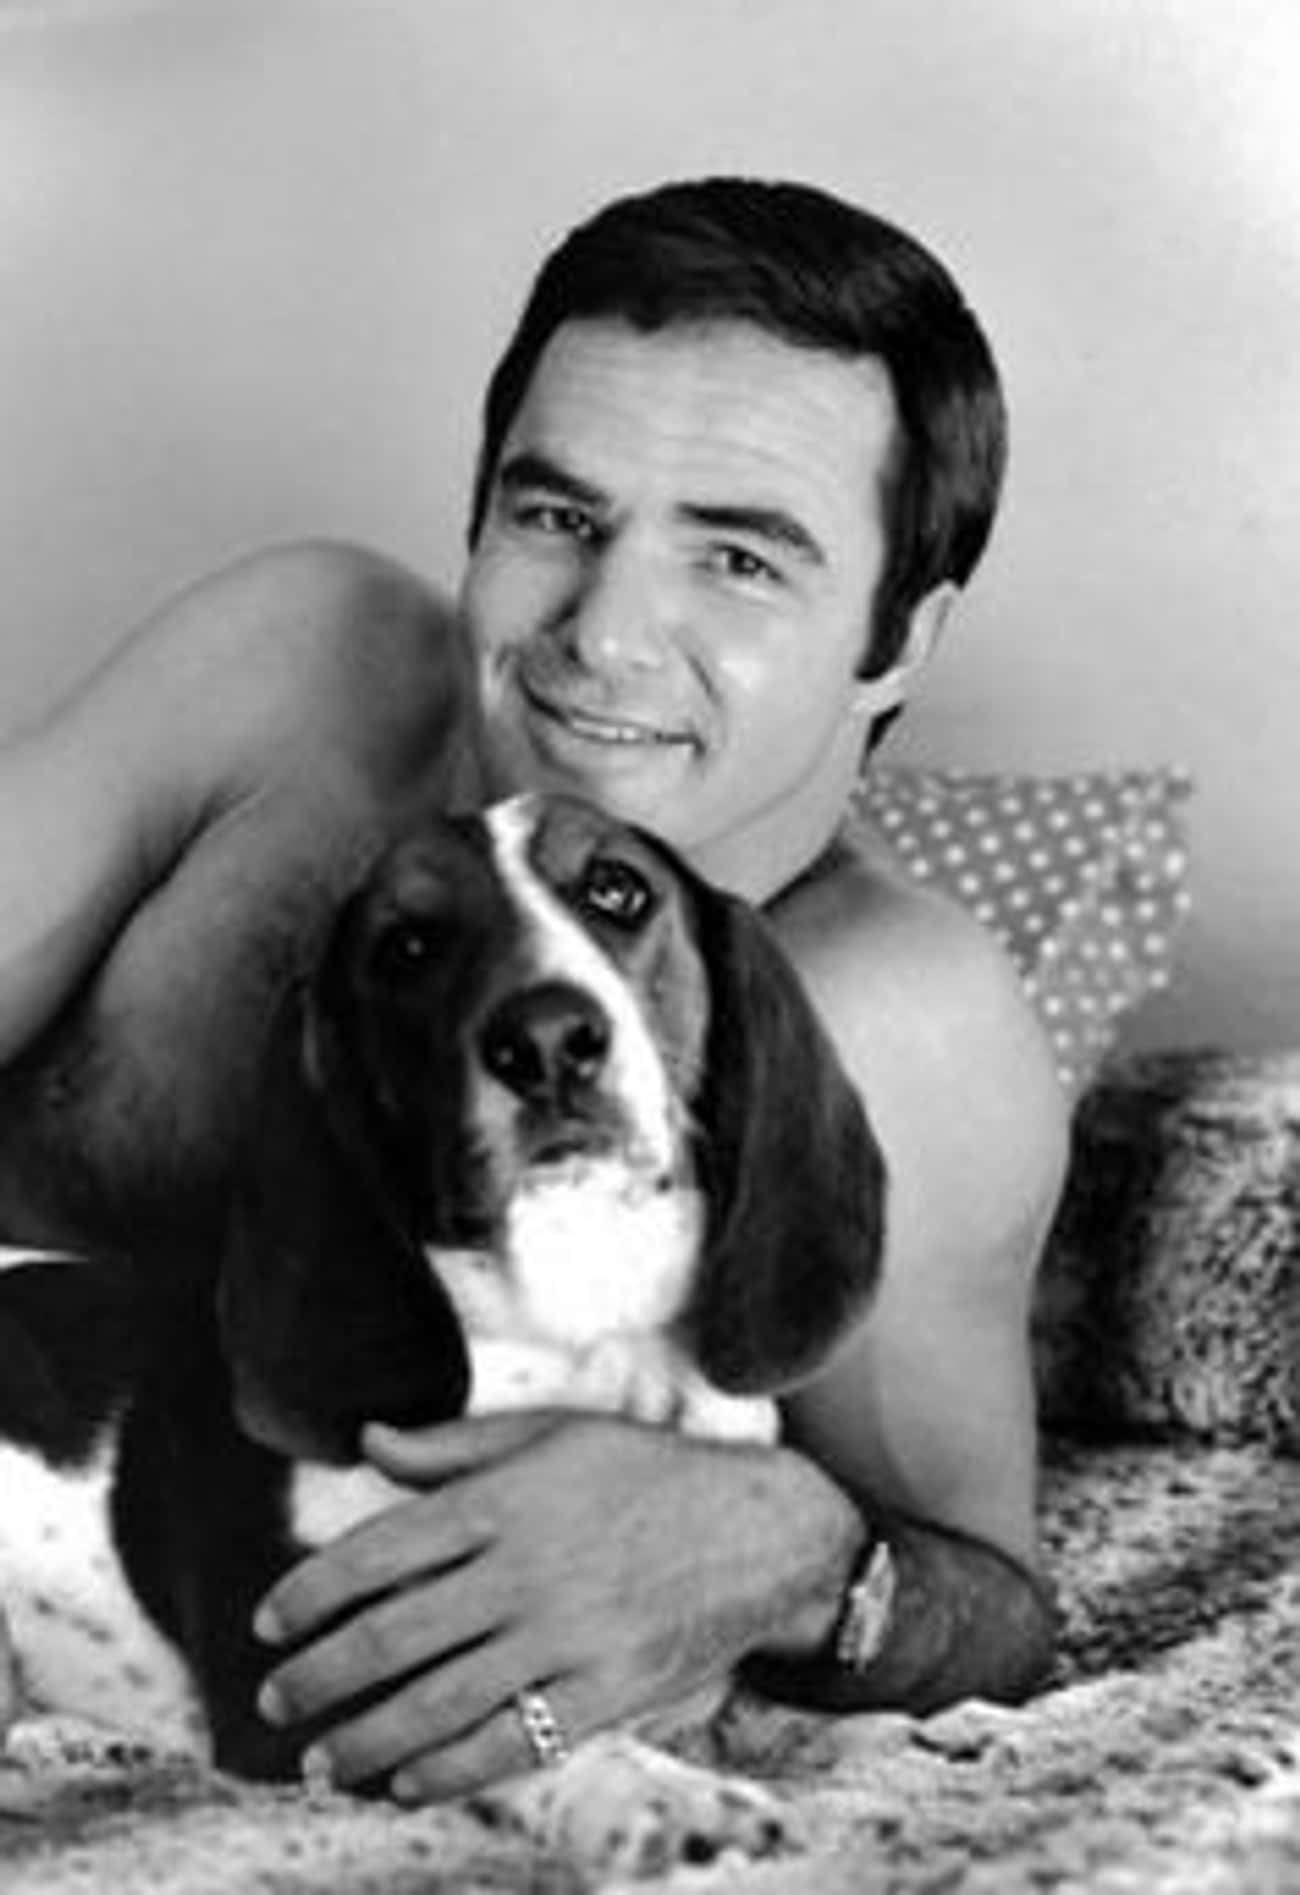 Young Burt Reynolds with a Dog